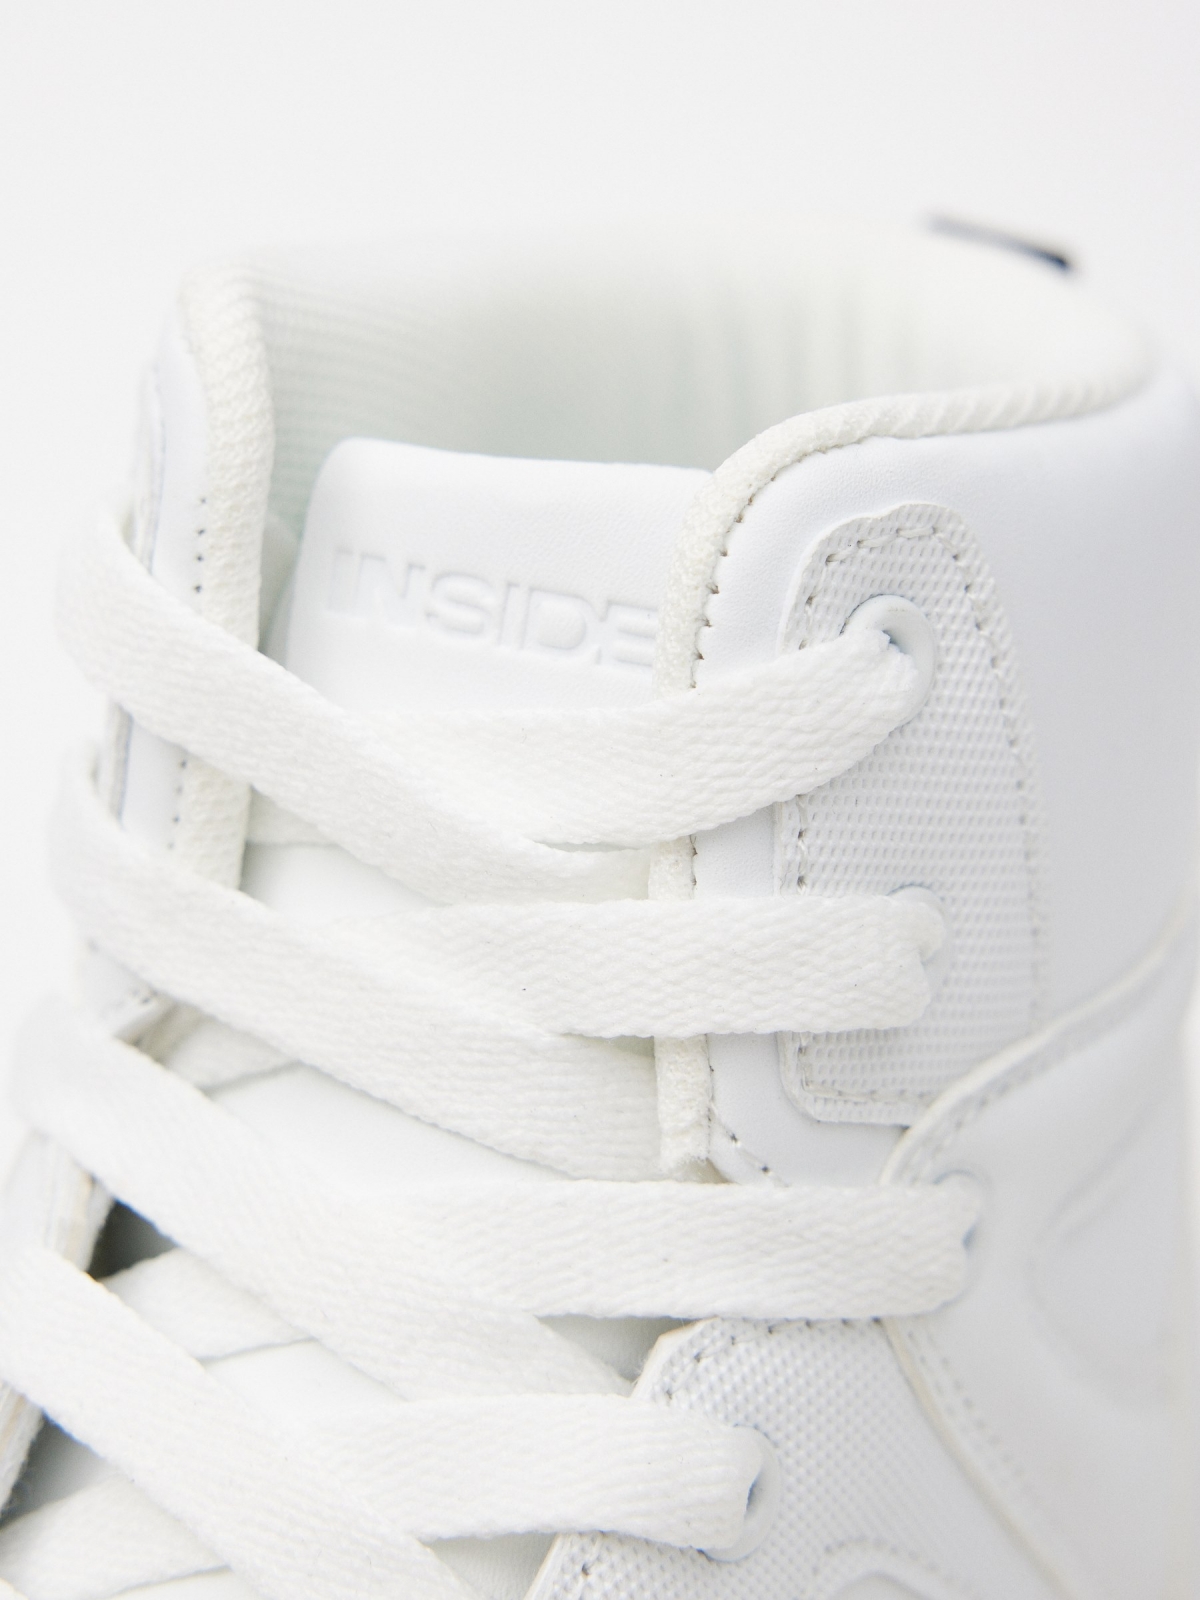 Sport boot white detail view